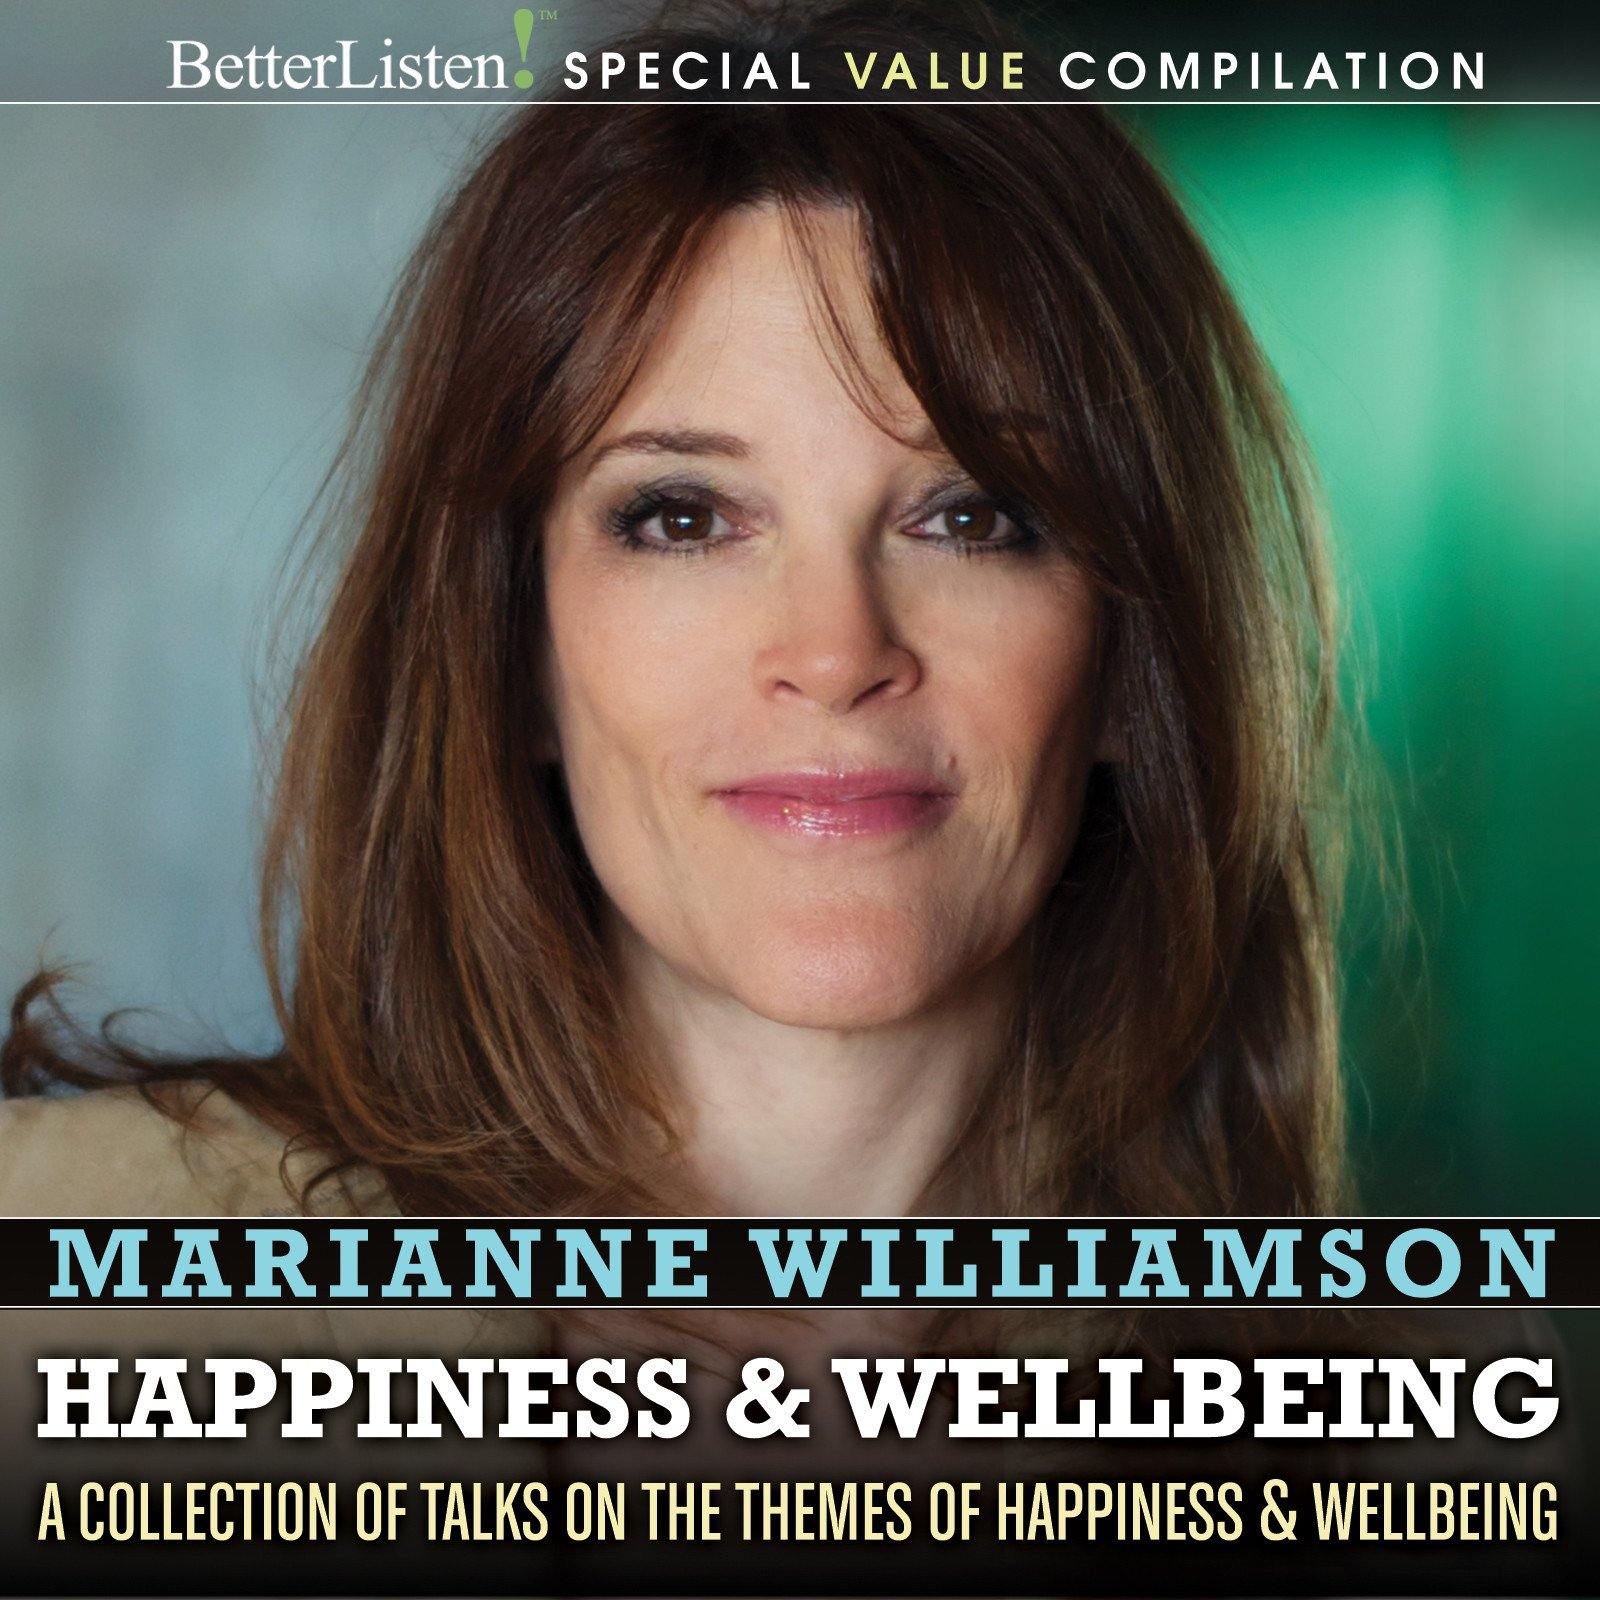 Marianne Williamson Happiness Compilation: A Collection of Talks on the Themes of Happiness & Wellbeing Audio Program Marianne Williamson - BetterListen!